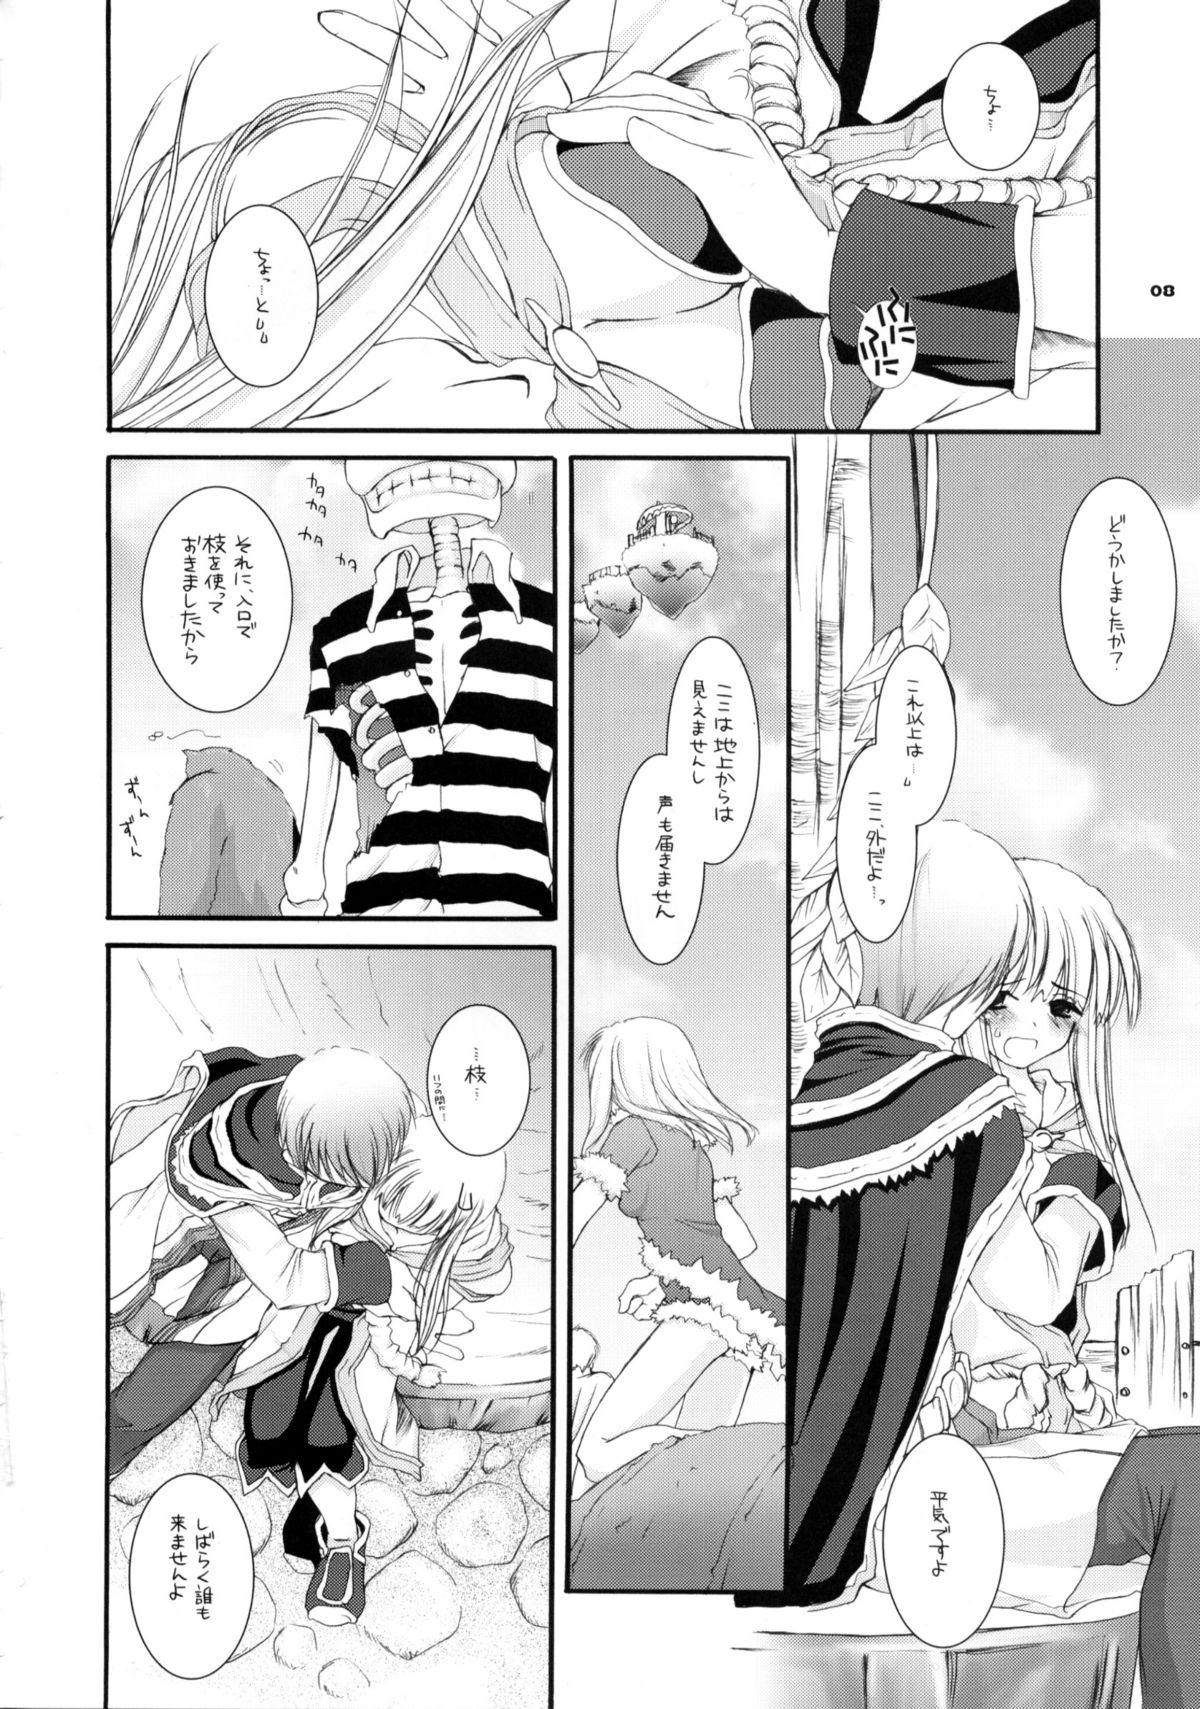 Hot D.L. Action 23 X-RATED - Ragnarok online Grandma - Page 7